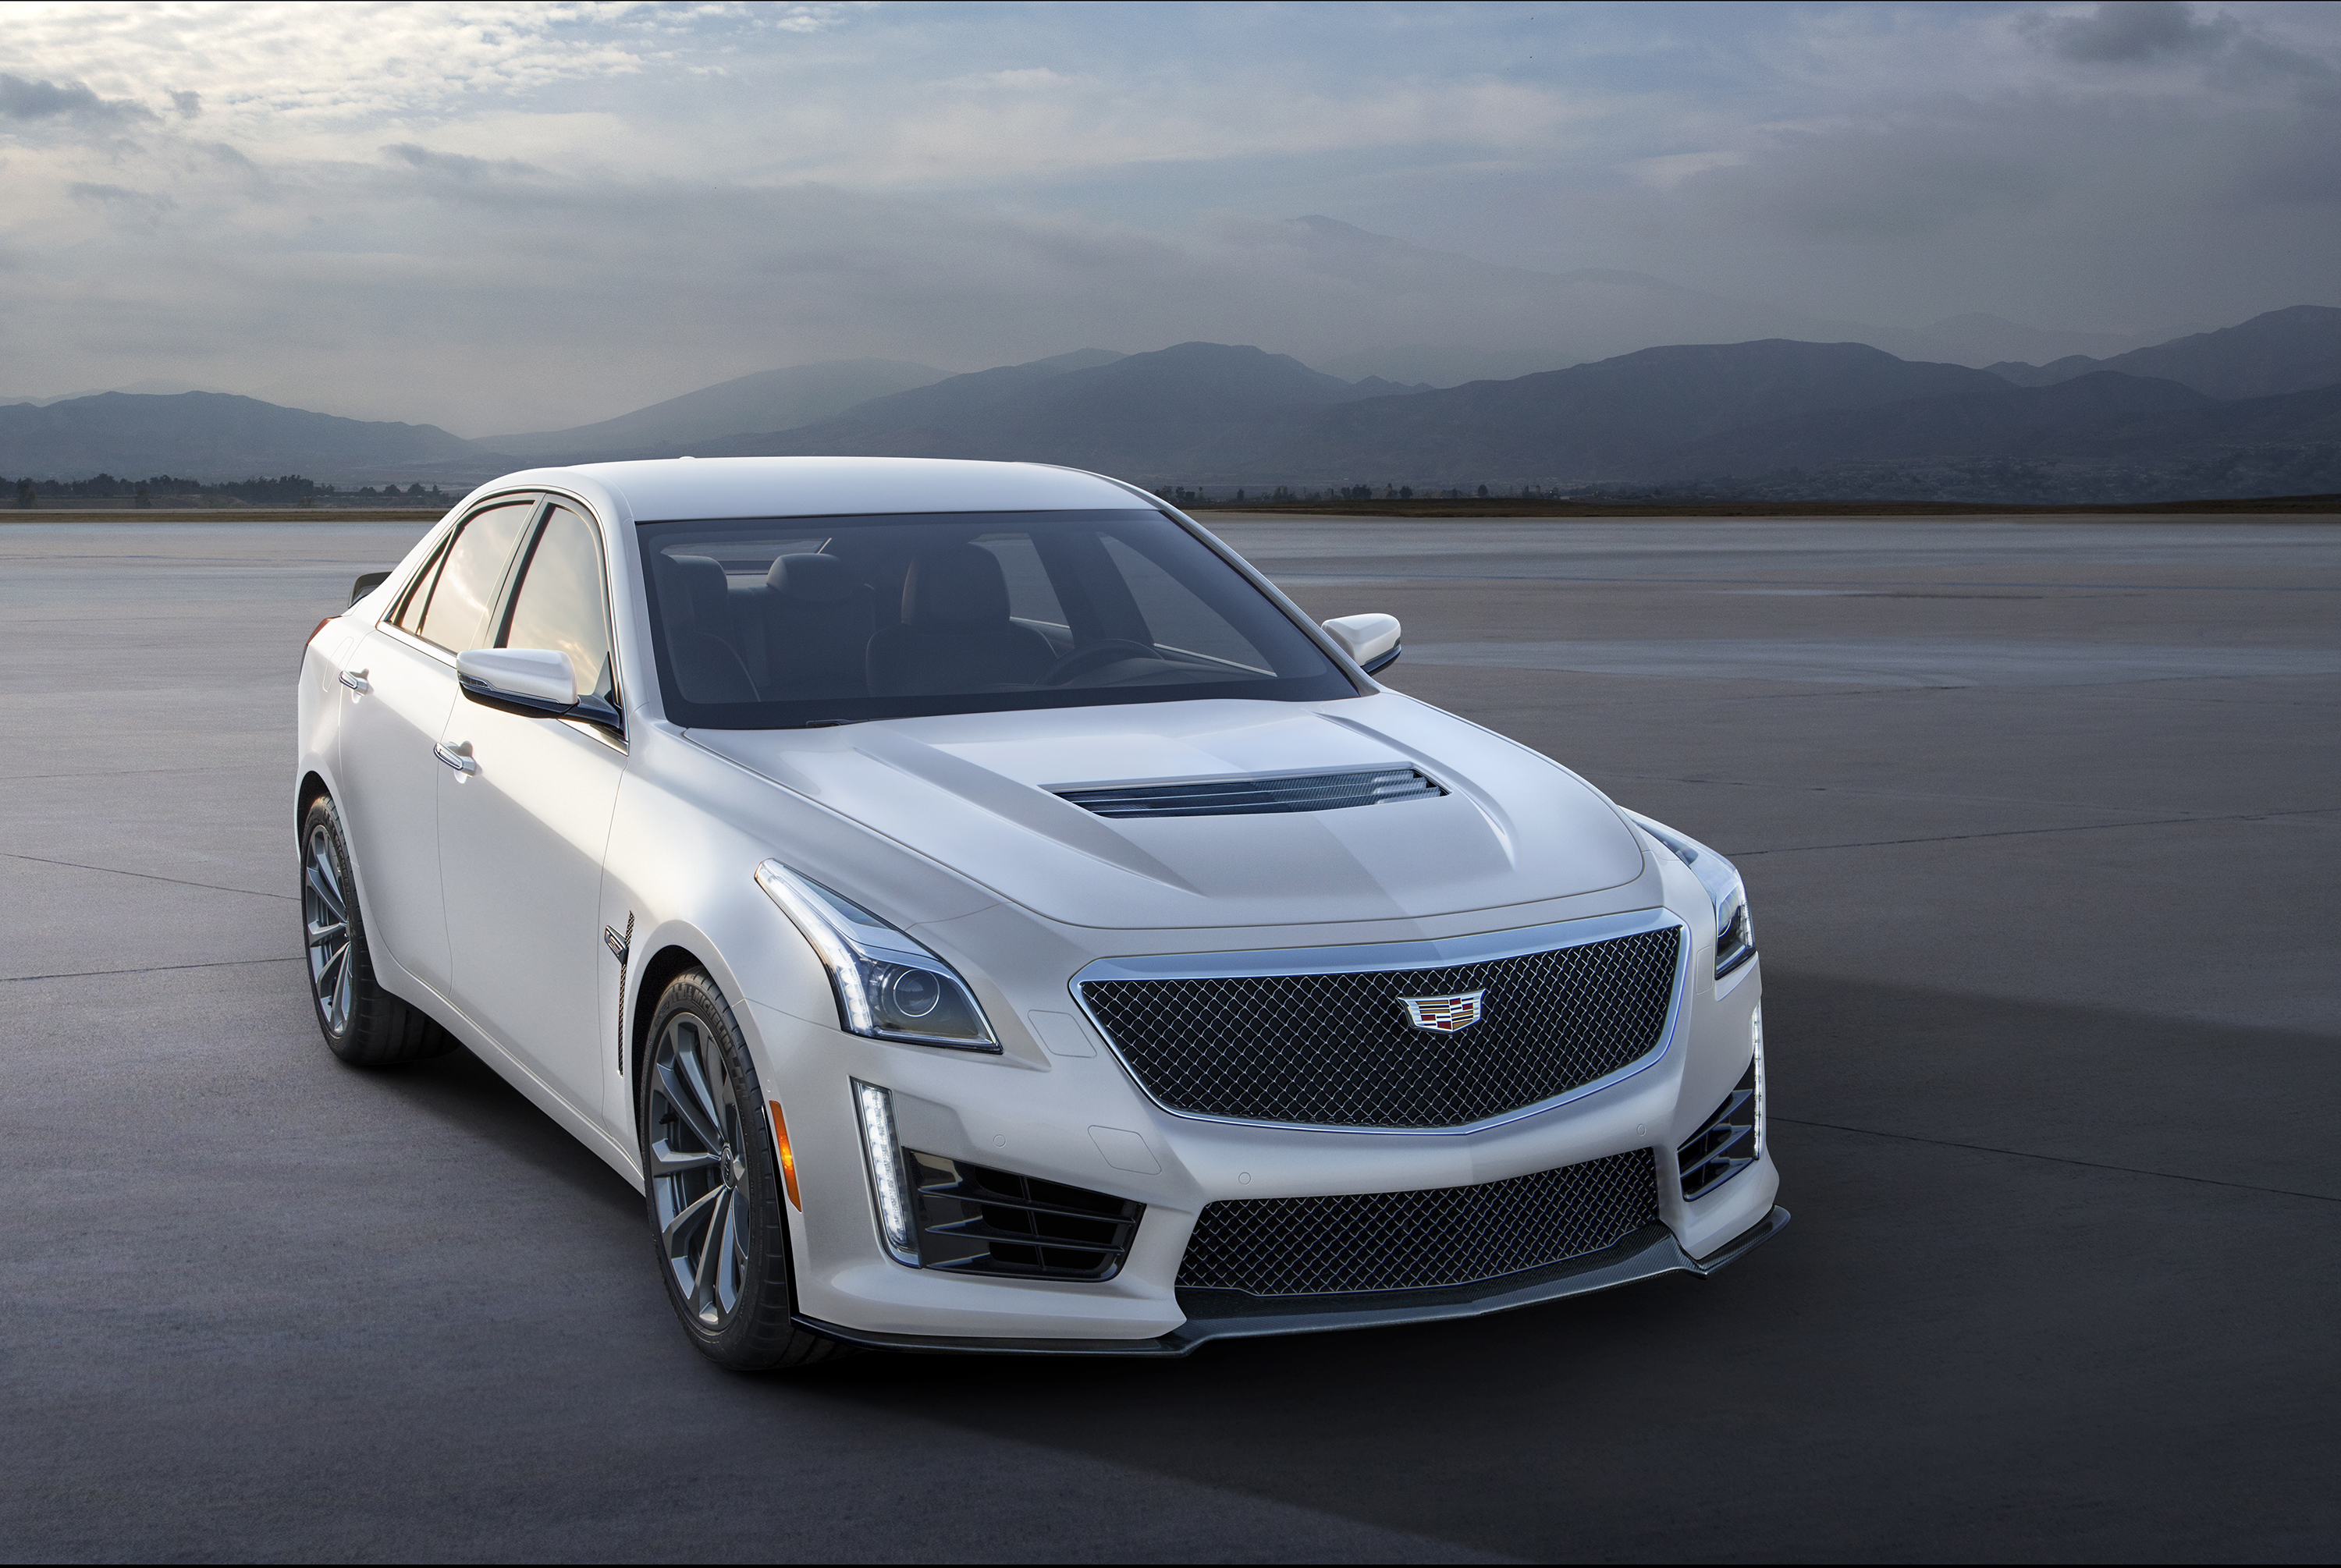 Cadillac CTS-V Sedan accessories specifications